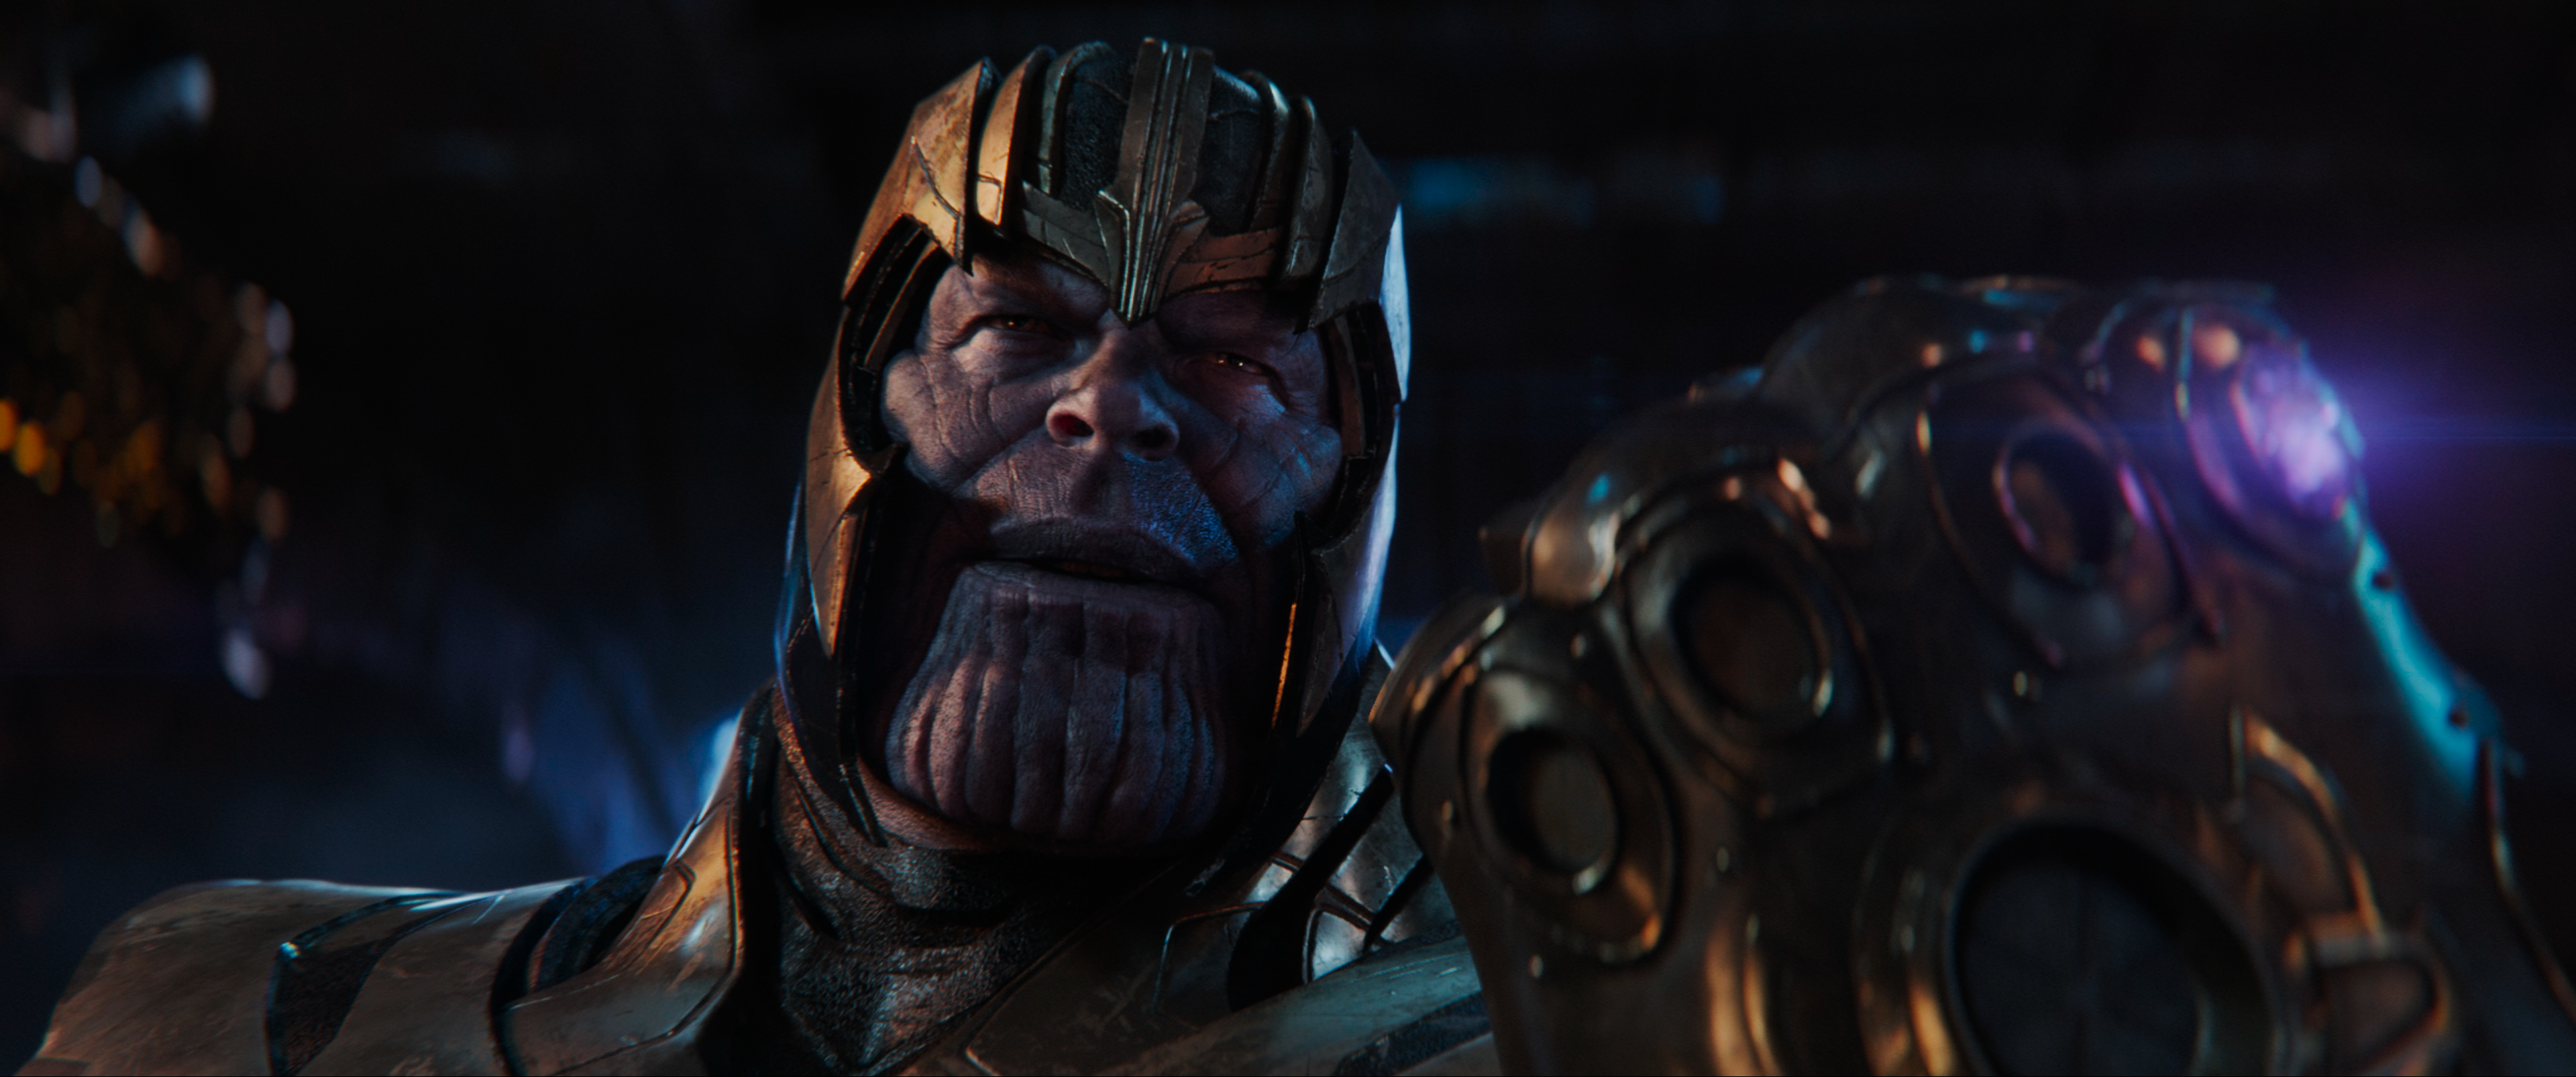 The Art of Avengers: Infinity War  Marvel Cinematic Universe Wiki